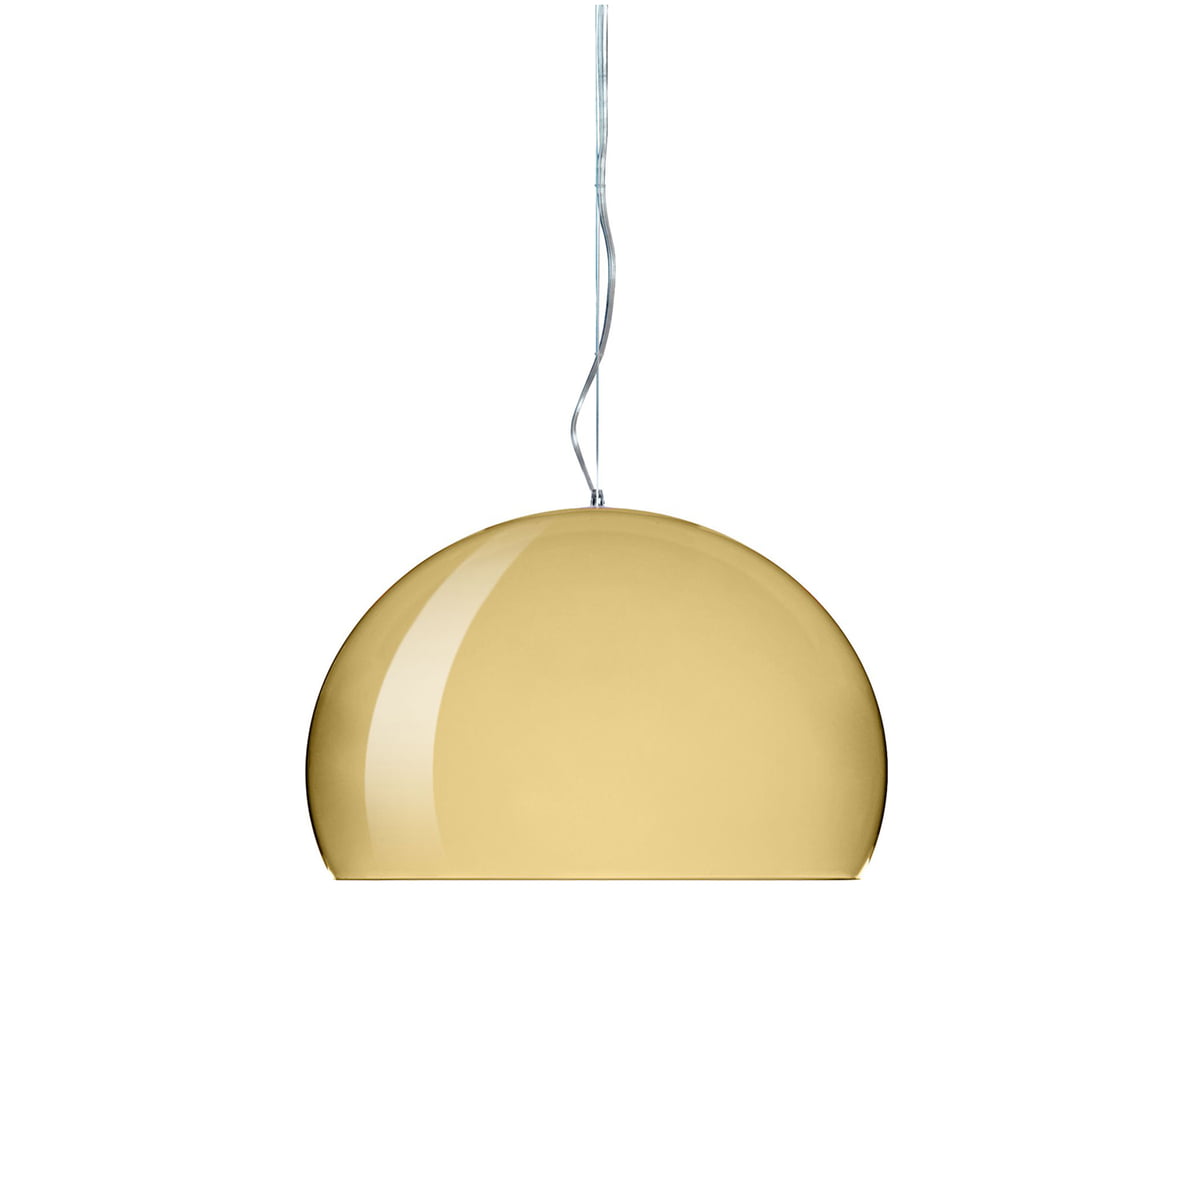 slang bladeren Boos Small FL/Y pendant lamp by Kartell in our shop